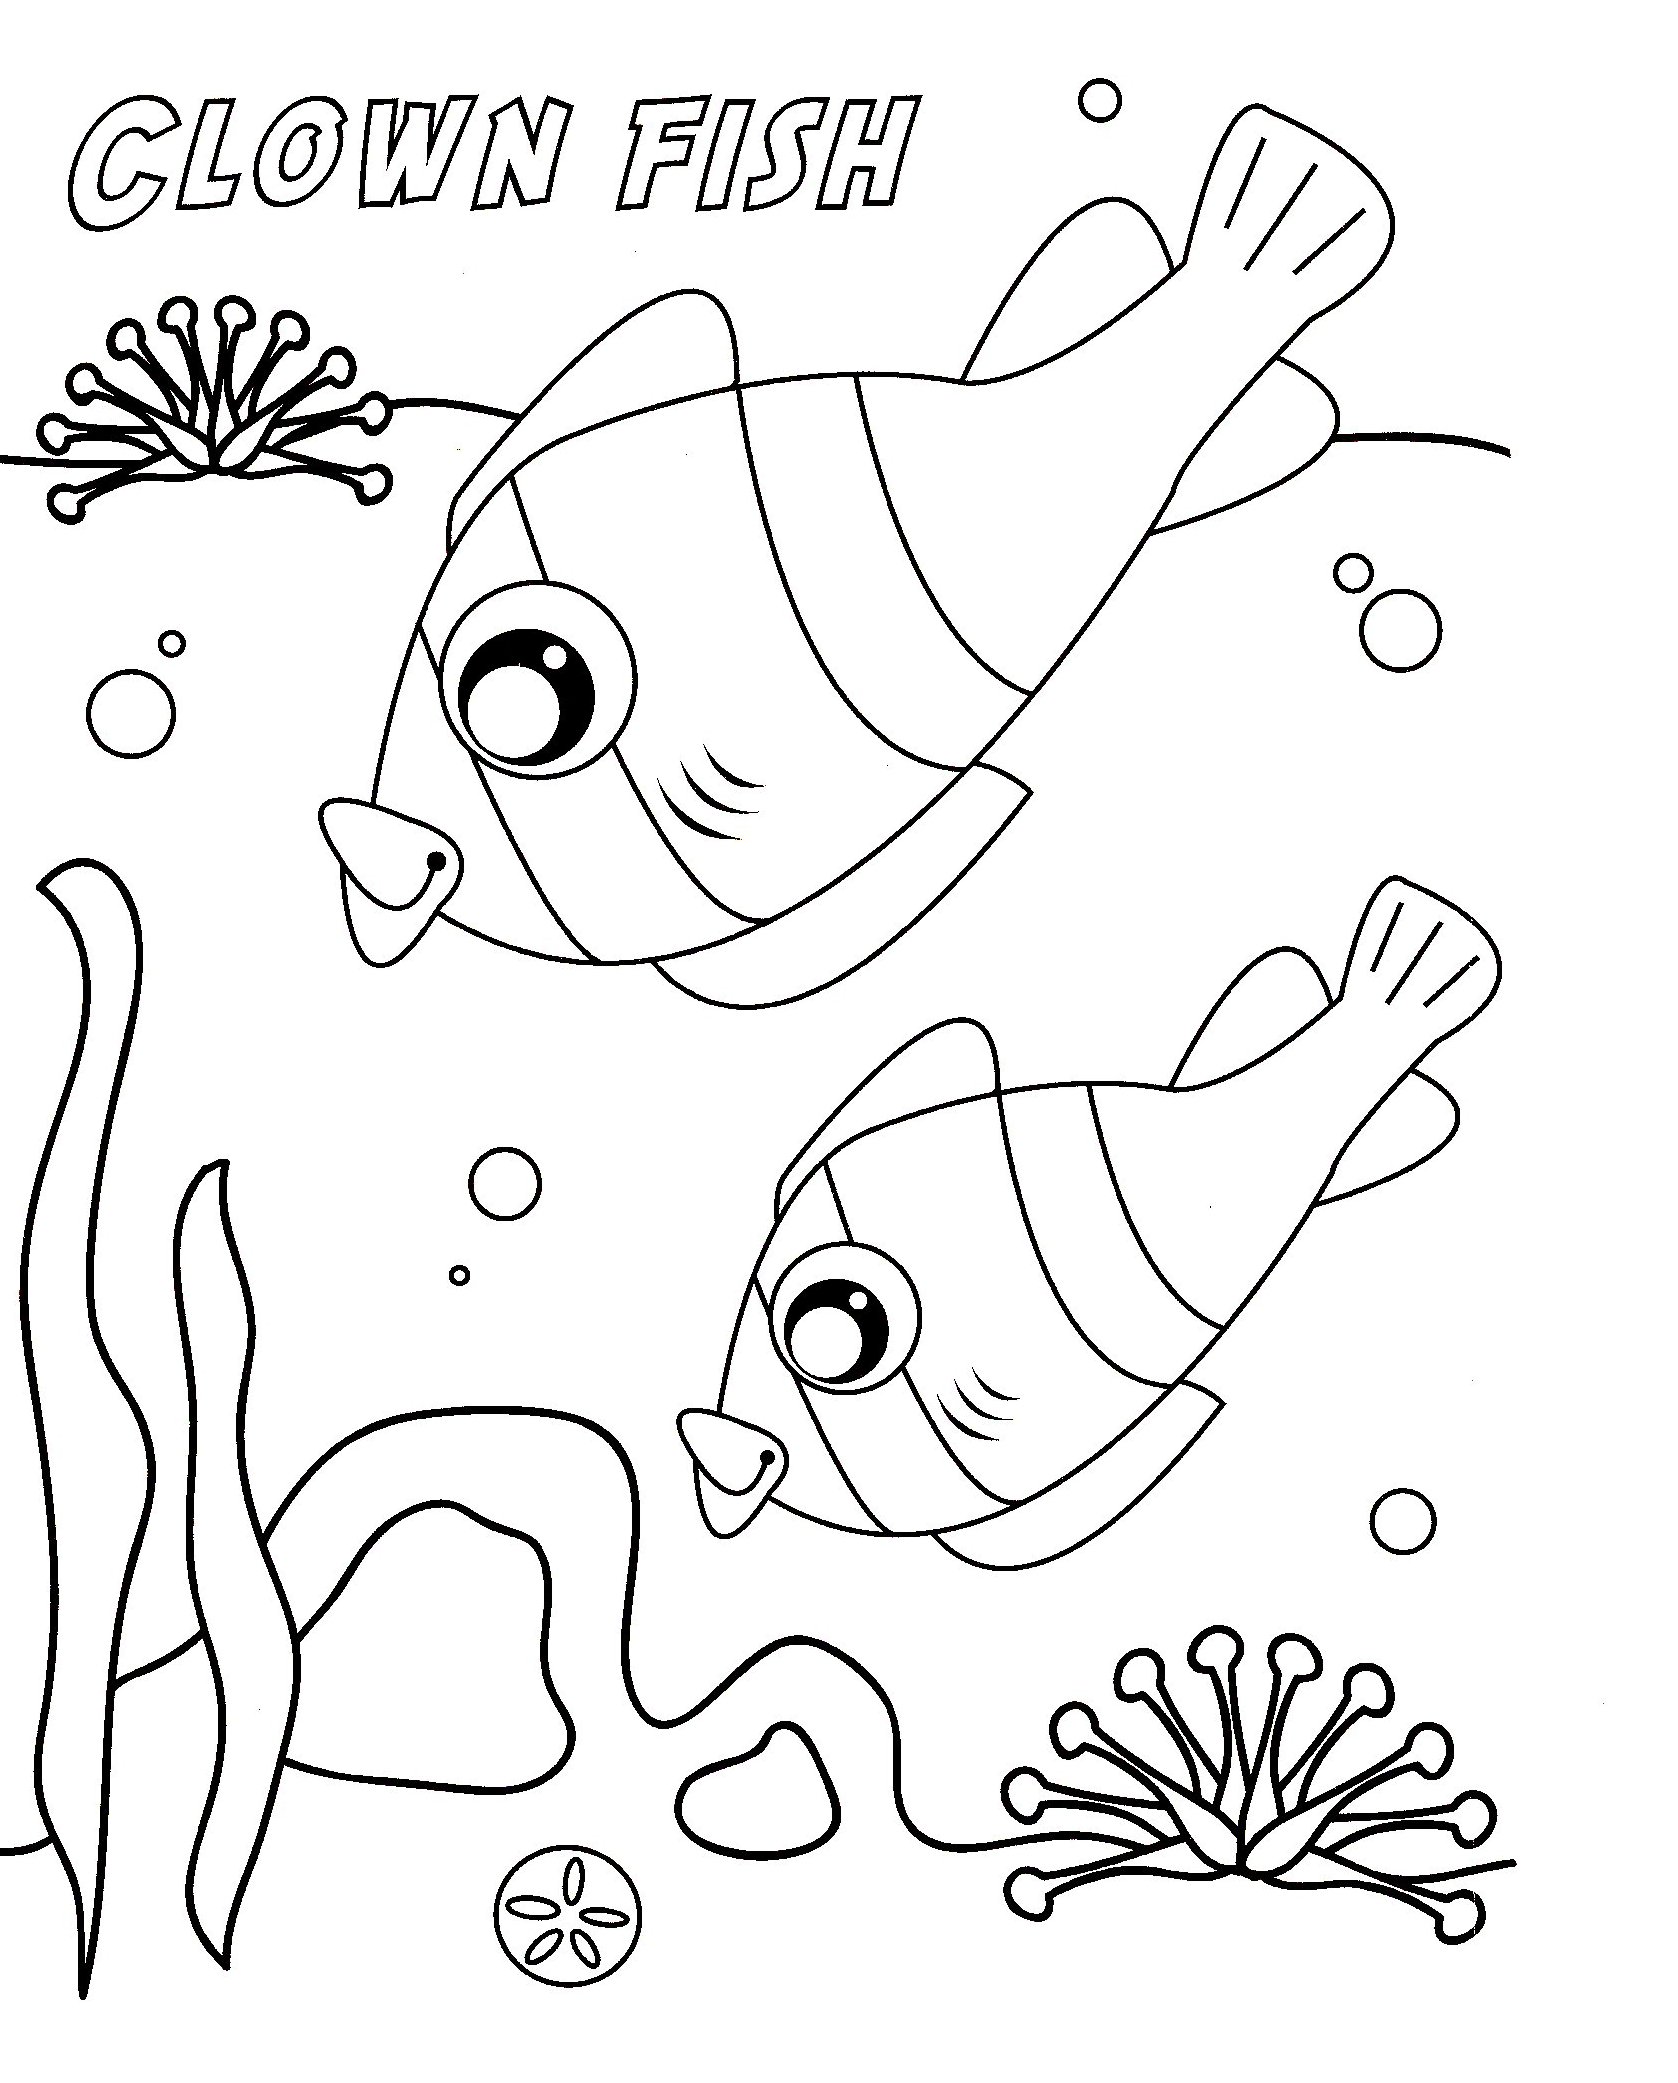 ocean fish coloring pages to download - photo #22